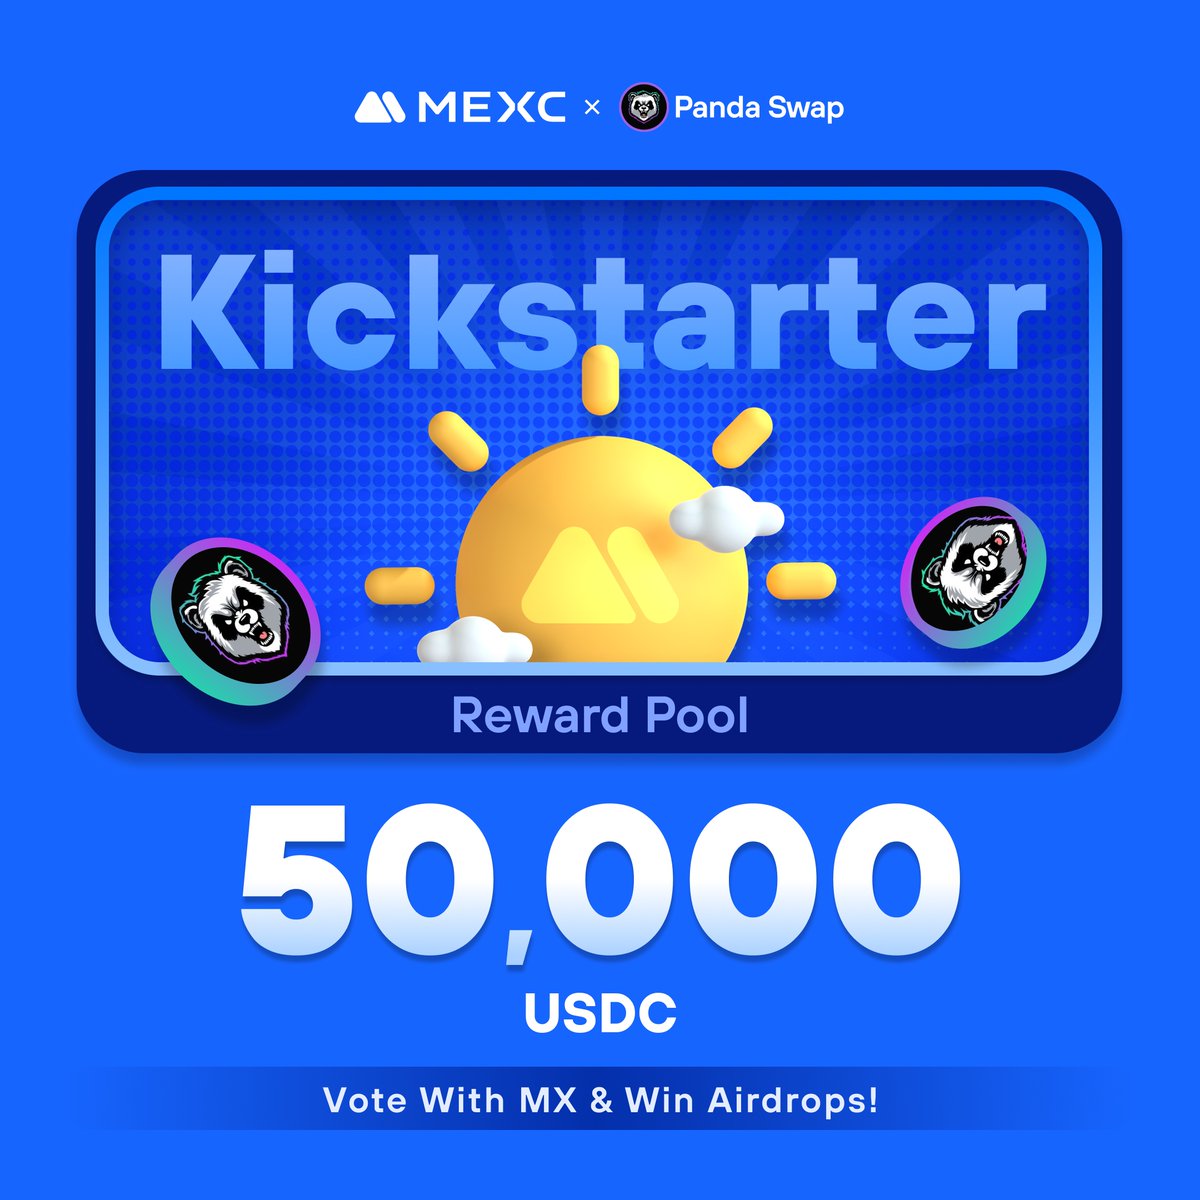 .@PandaSwapSol, an automated market maker (AMM) designed on Solana, which utilises a central limit order book to execute lightning-fast trades, shared liquidity and new features for earning yield, is coming to #MEXCKickstarter 🚀 🗳Vote with $MX to share massive airdrops 📈